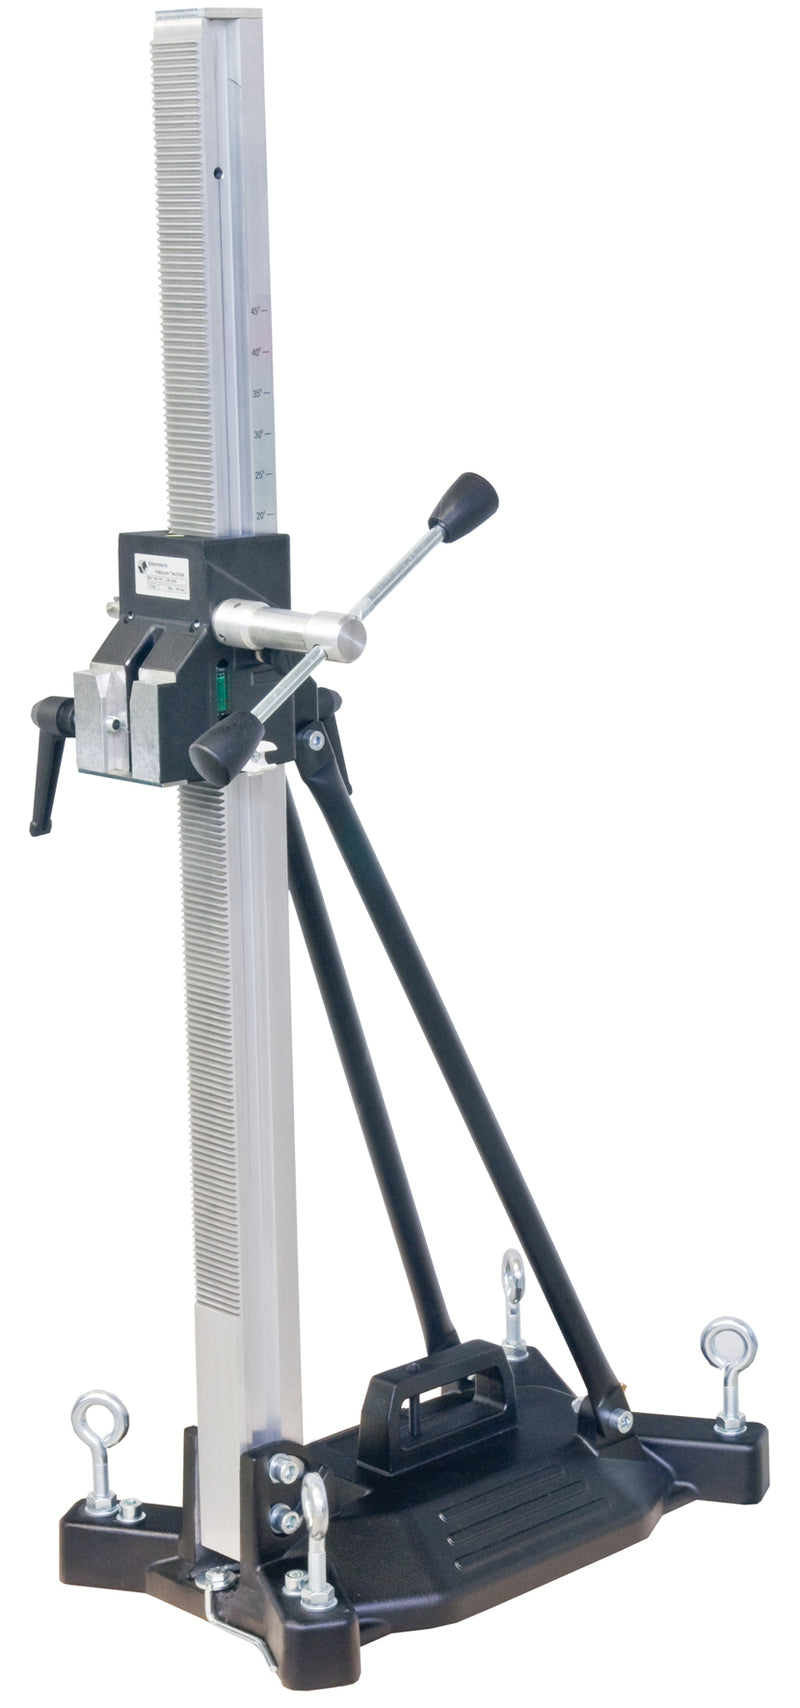 Eibenstock BST 162 V Anchor/Vac Combo Stand with 33 1/2" Tall Column and Space Saving Base